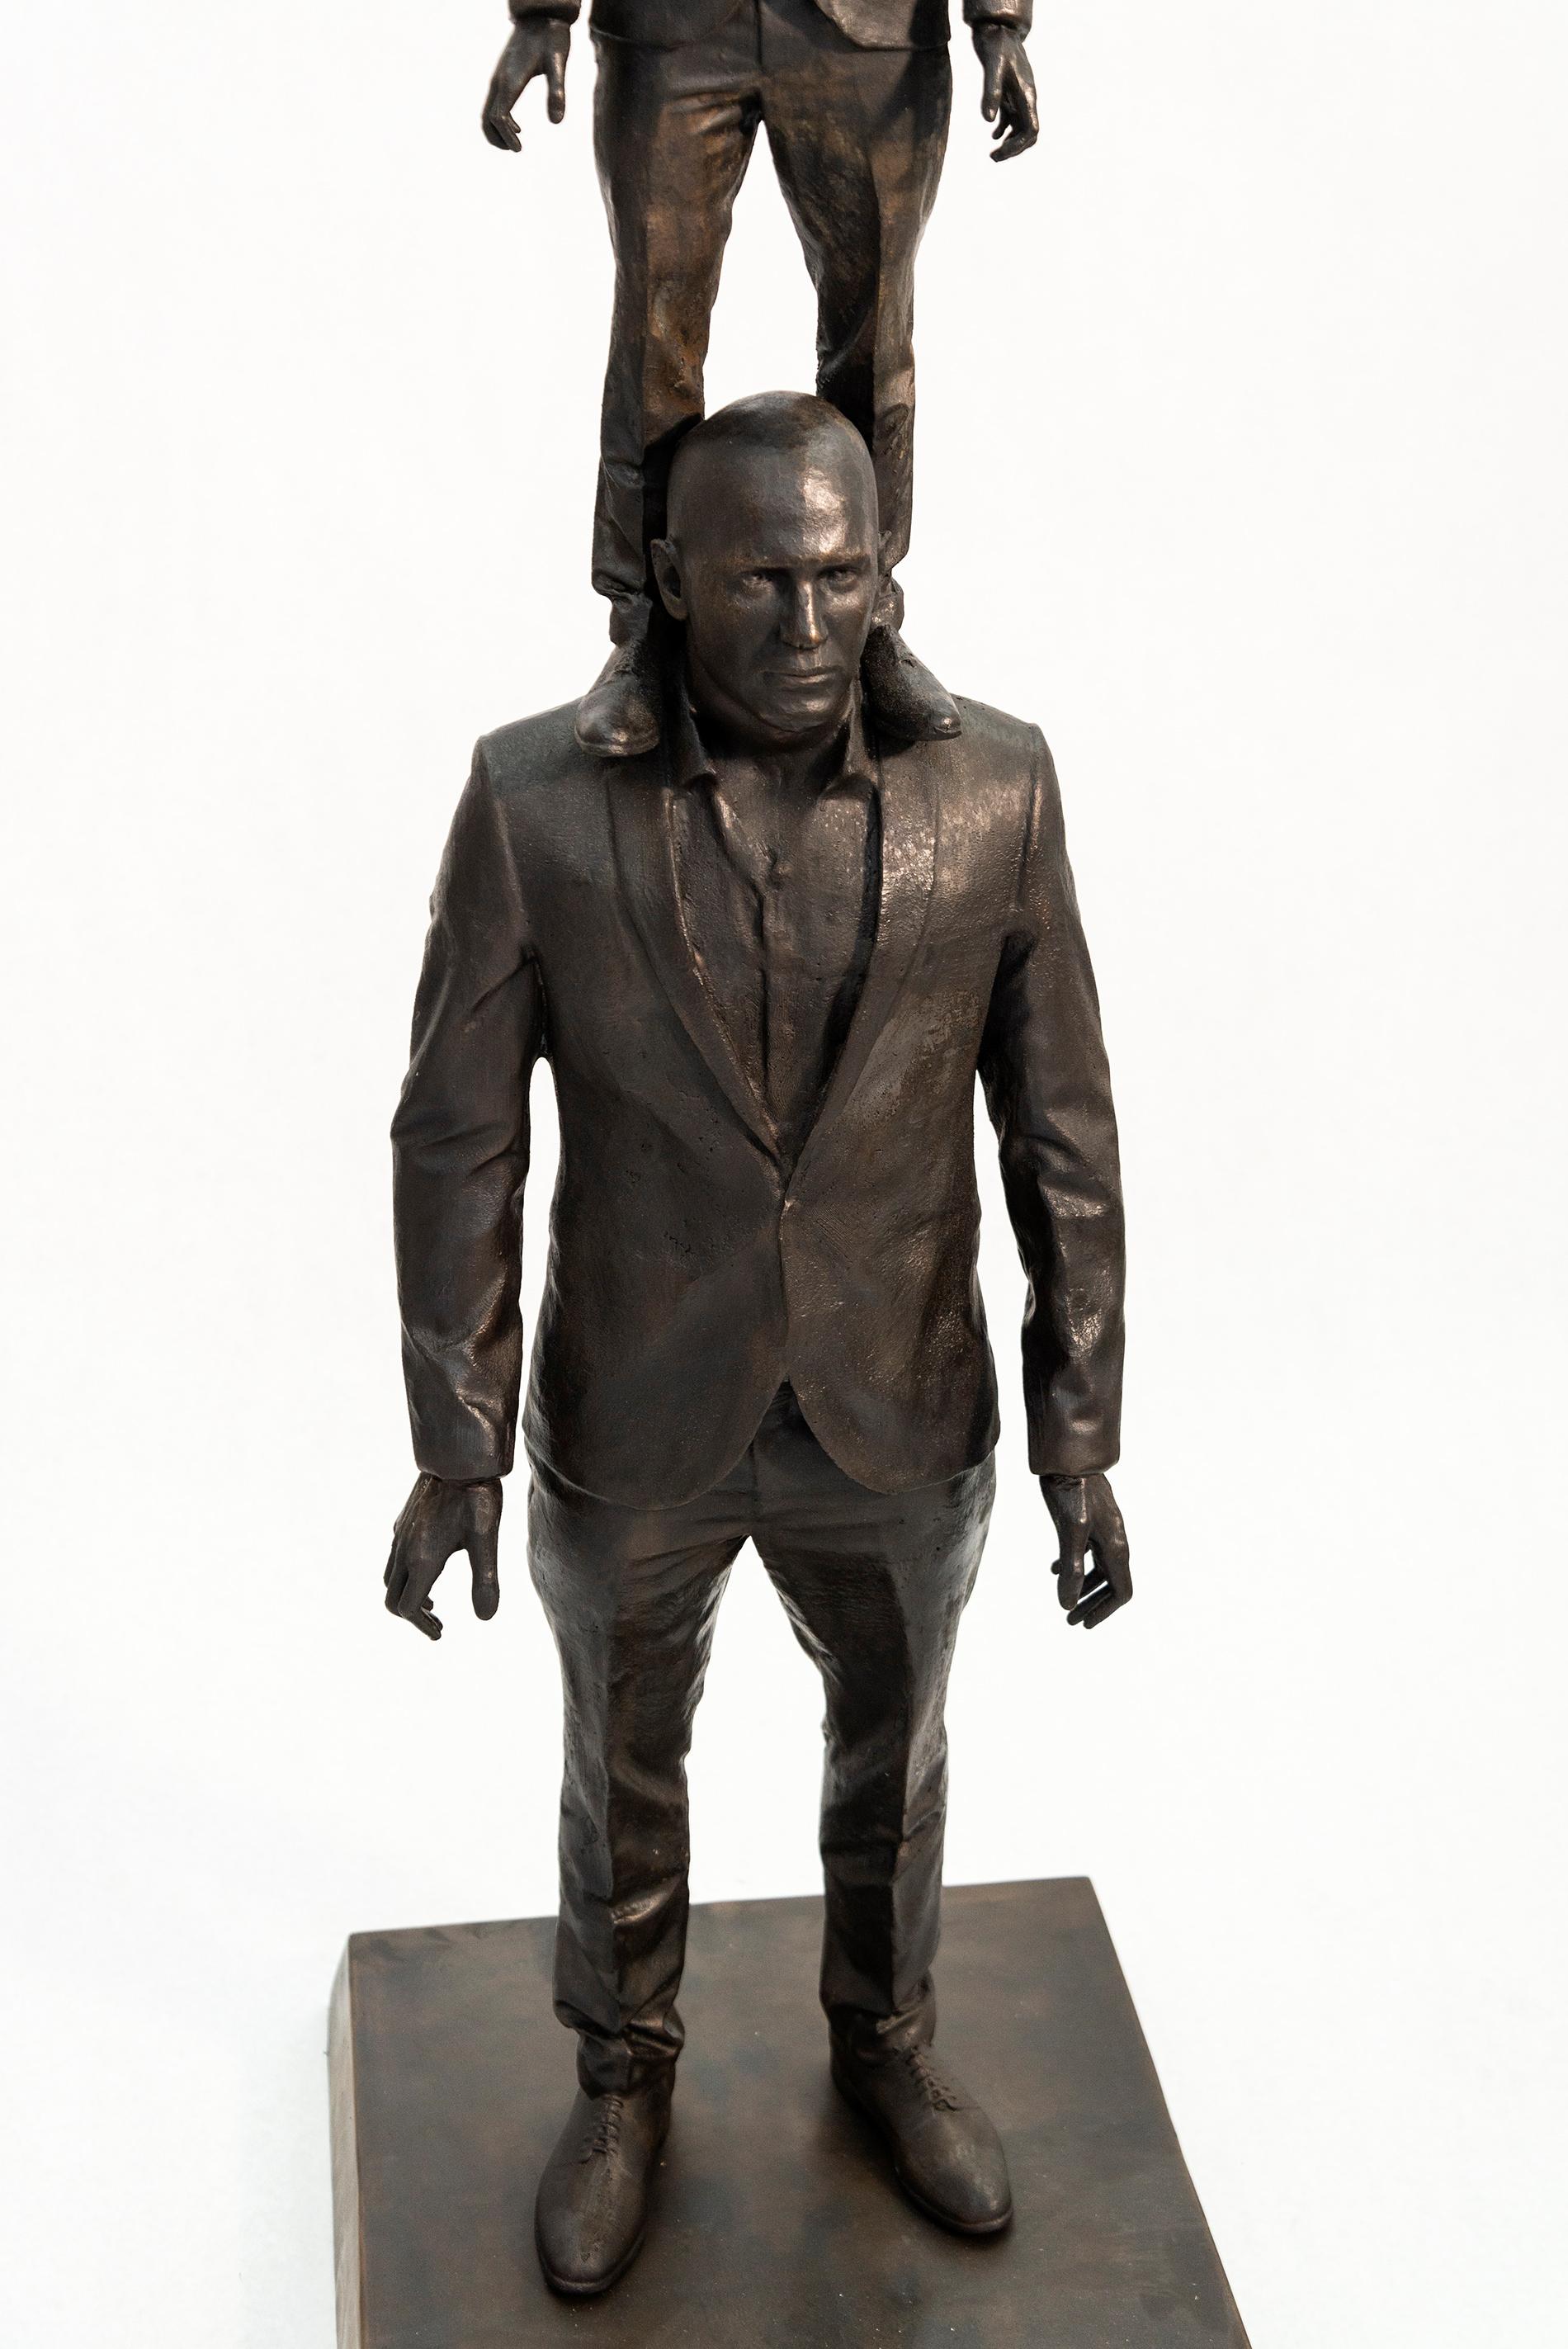 This piece is available by commission, please inquire for lead time.

Roch Smith’s inspired bronze sculpture is a clever ‘play’ on a popular saying. “If I have seen further, it is by standing on the shoulders of giants,” (Sir Isaac Newton) This